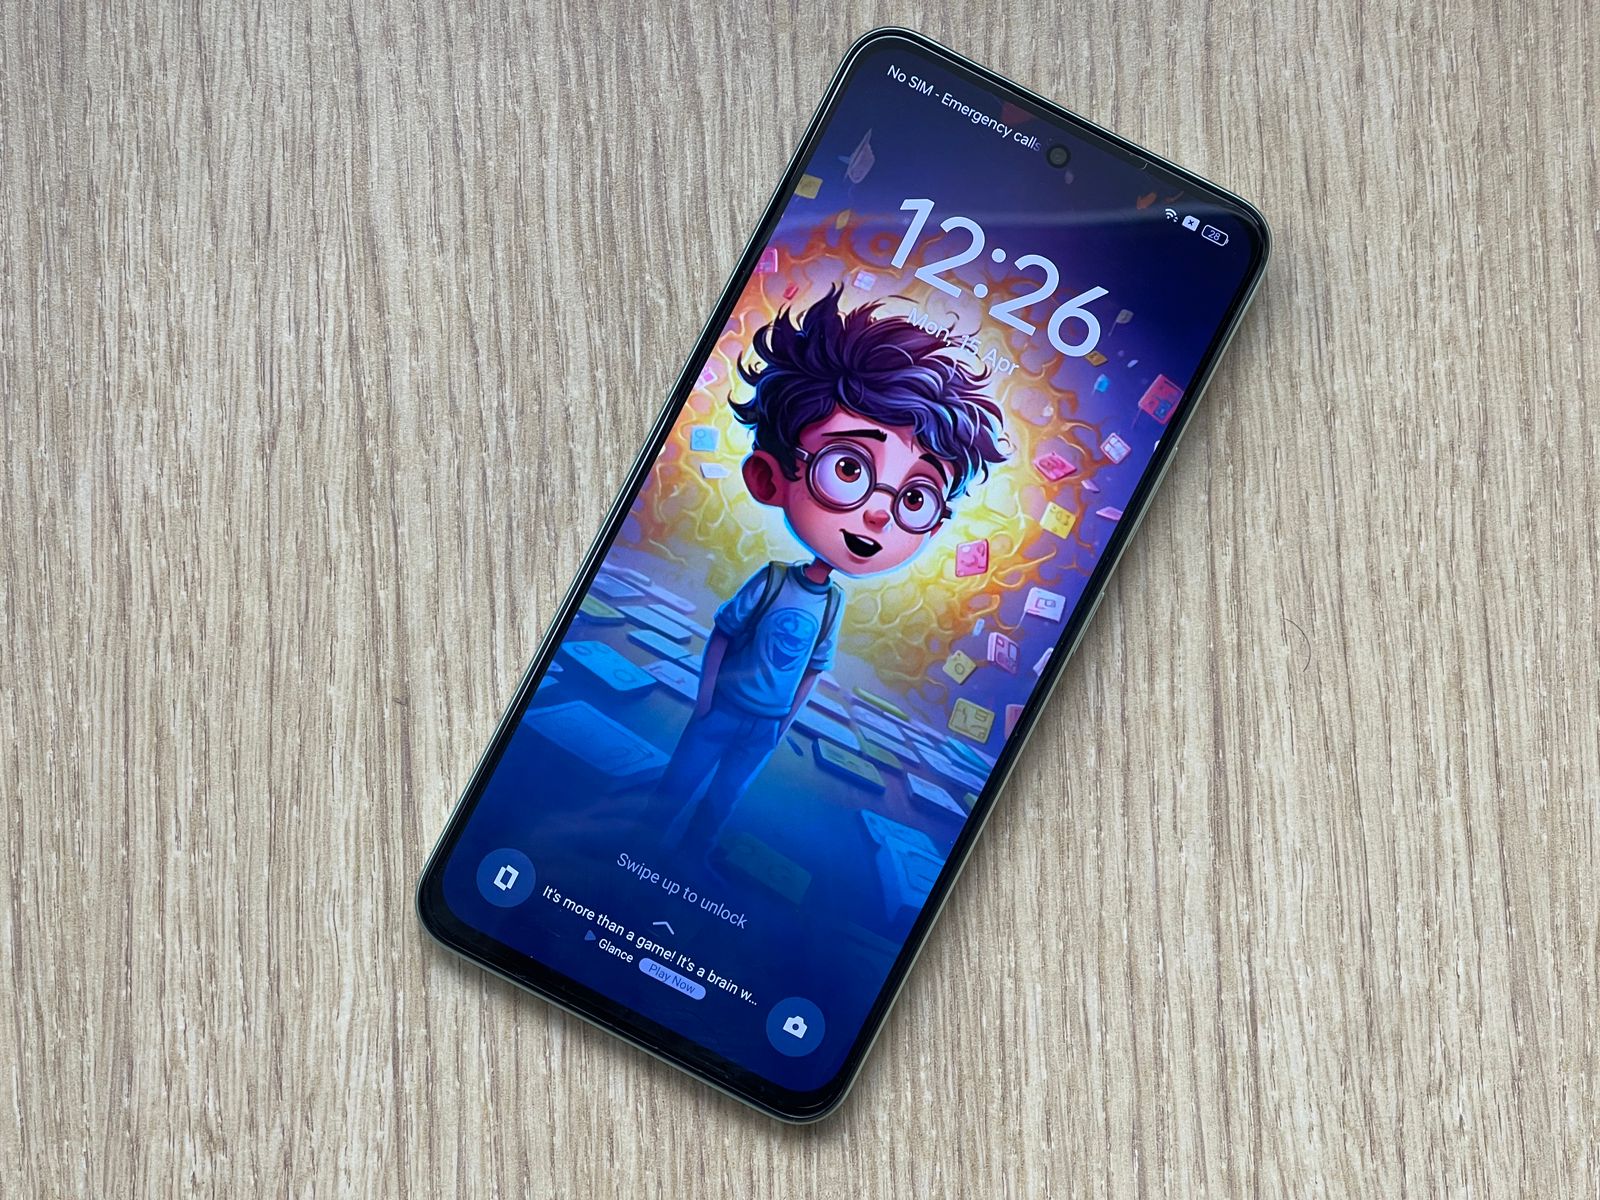 Realme P1 5G: Performance and Features